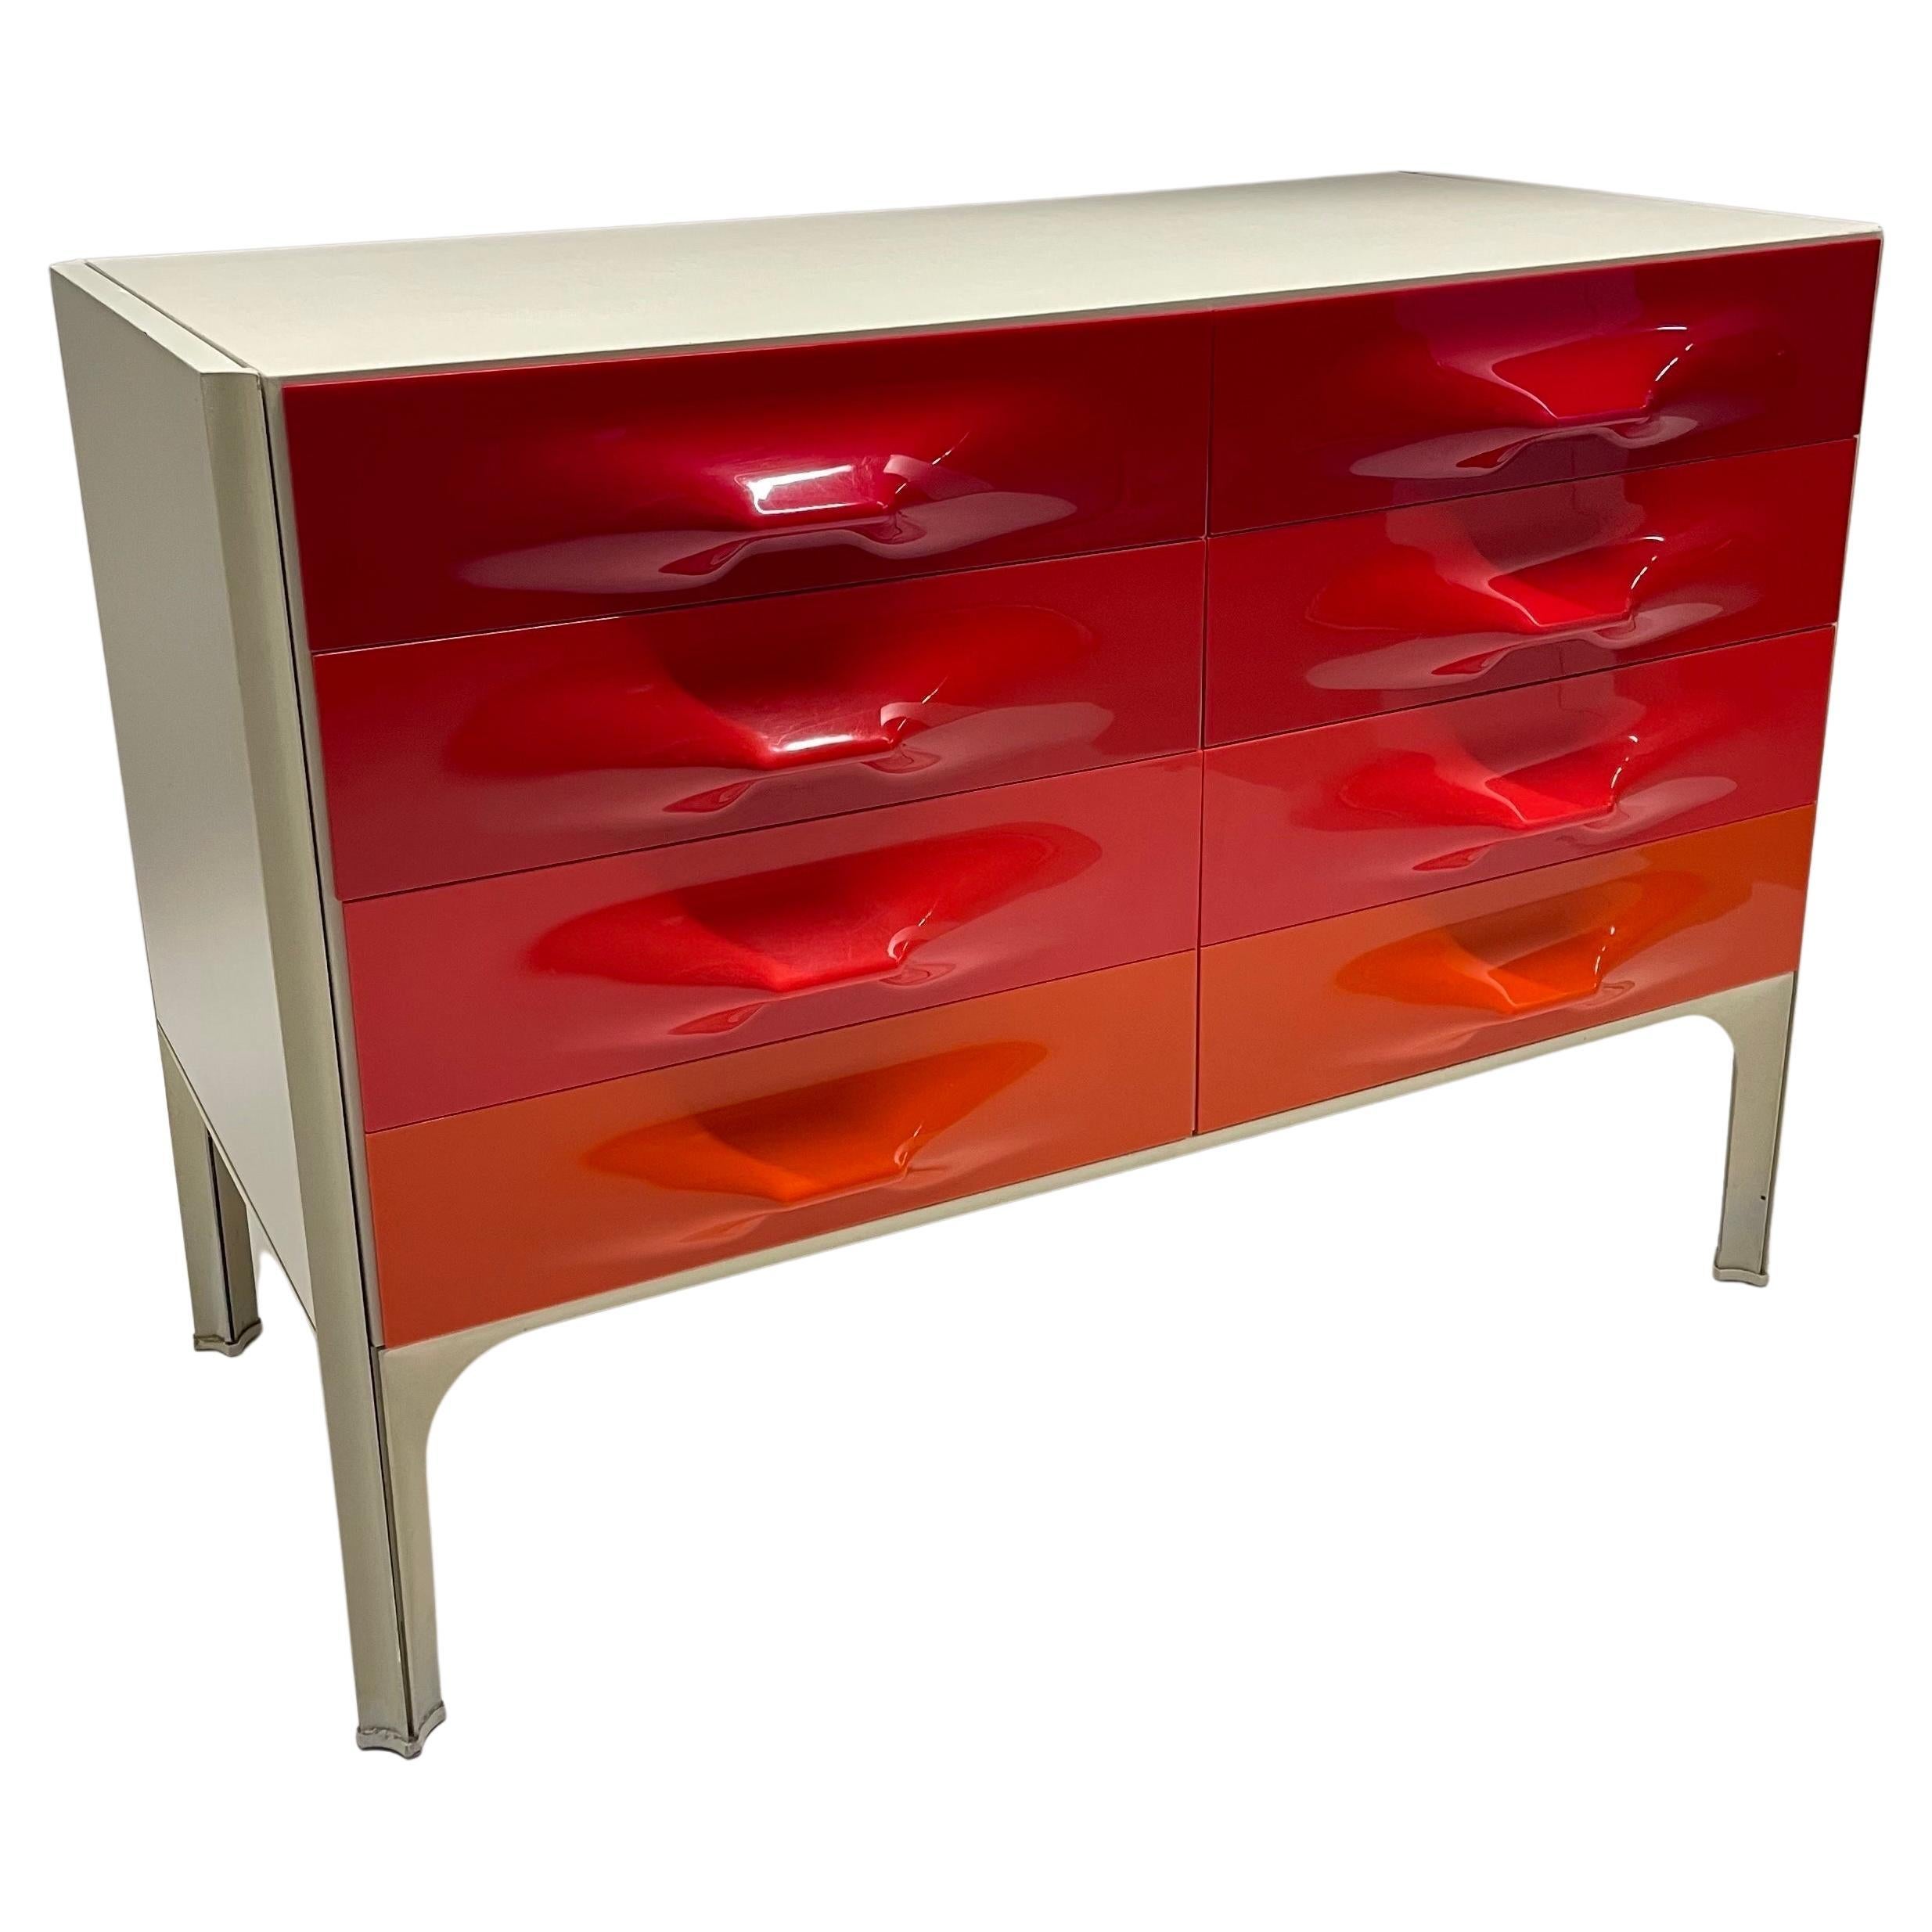 Raymond Loewy DF-2000 Commode, Chest of Drawers, or Dresser, France, circa 1968